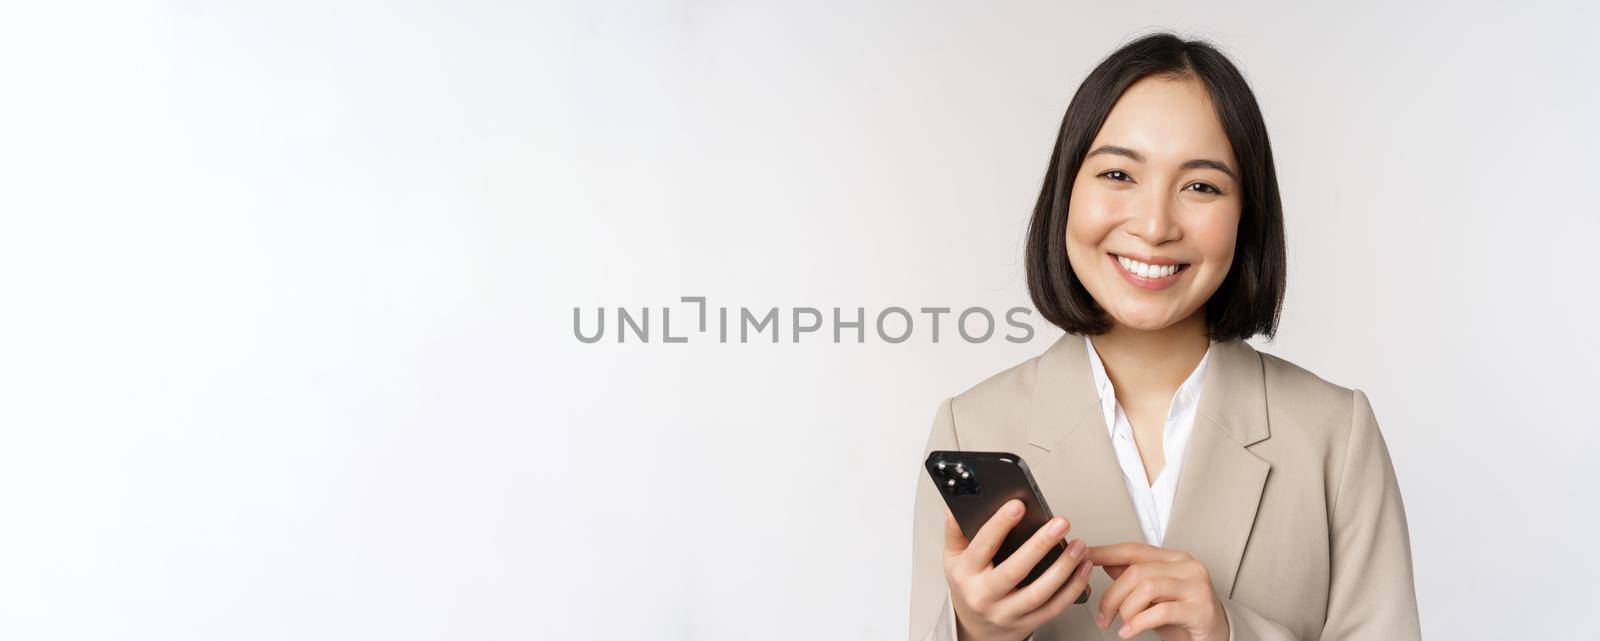 Close up portrait of korean woman, corporate lady in suit, using mobile phone and smiling, holding smartphone, standing over white background.